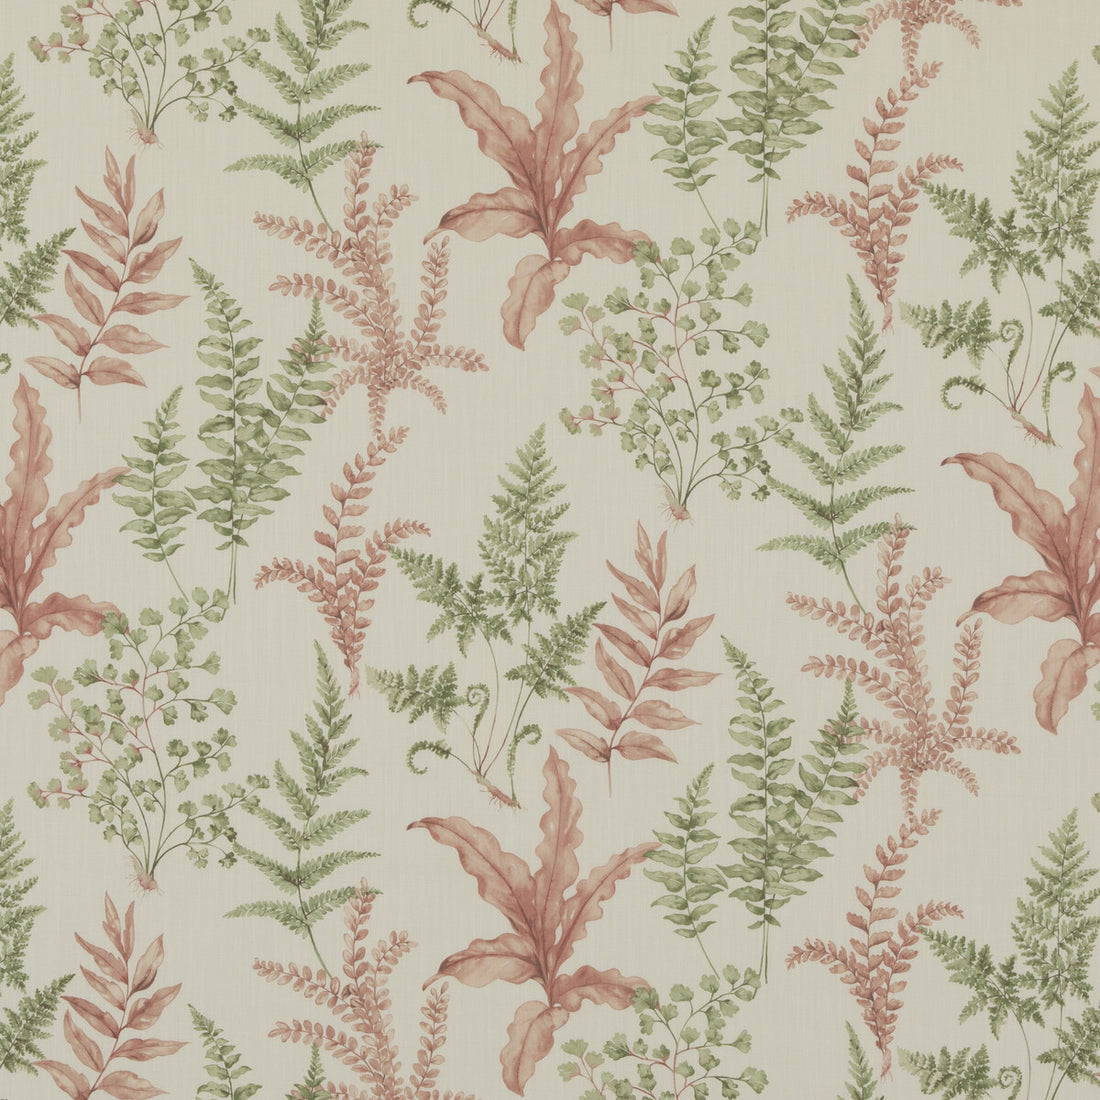 Ferndown fabric in green/pink color - pattern PP50503.4.0 - by Baker Lifestyle in the Bridport collection